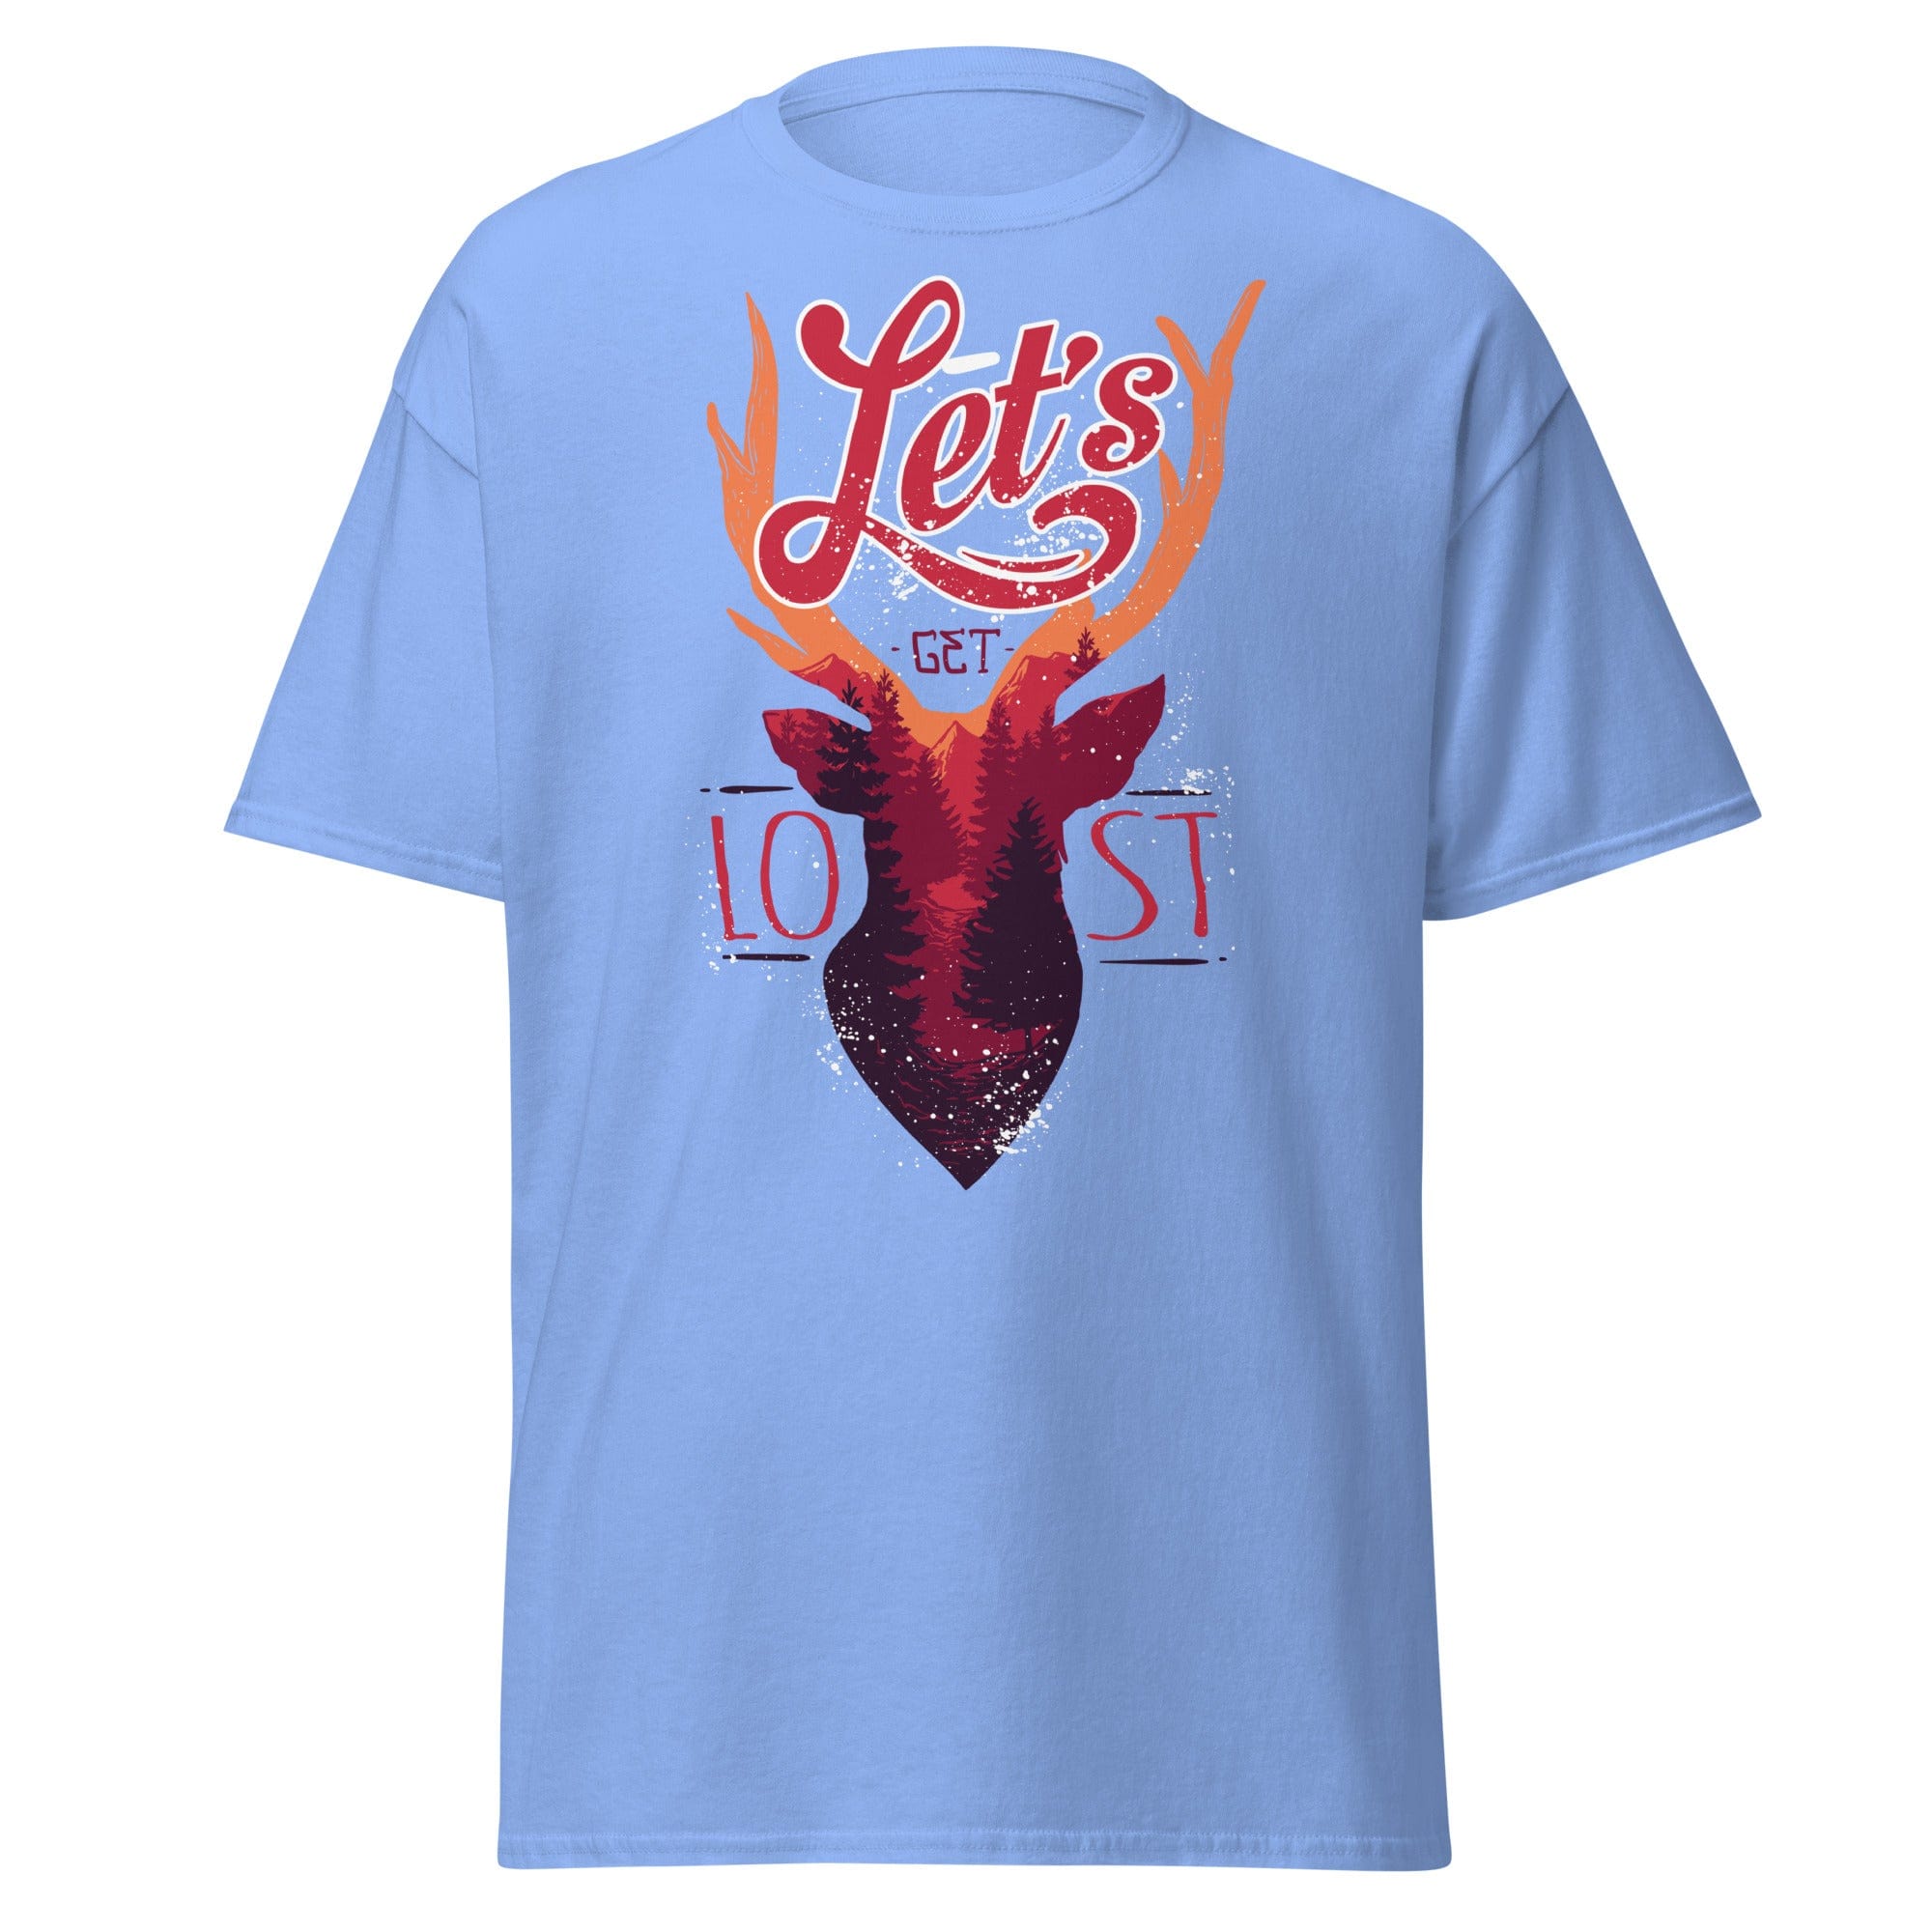 Lets Get Lost Mens Graphic Tee - Kicks Shoelaces